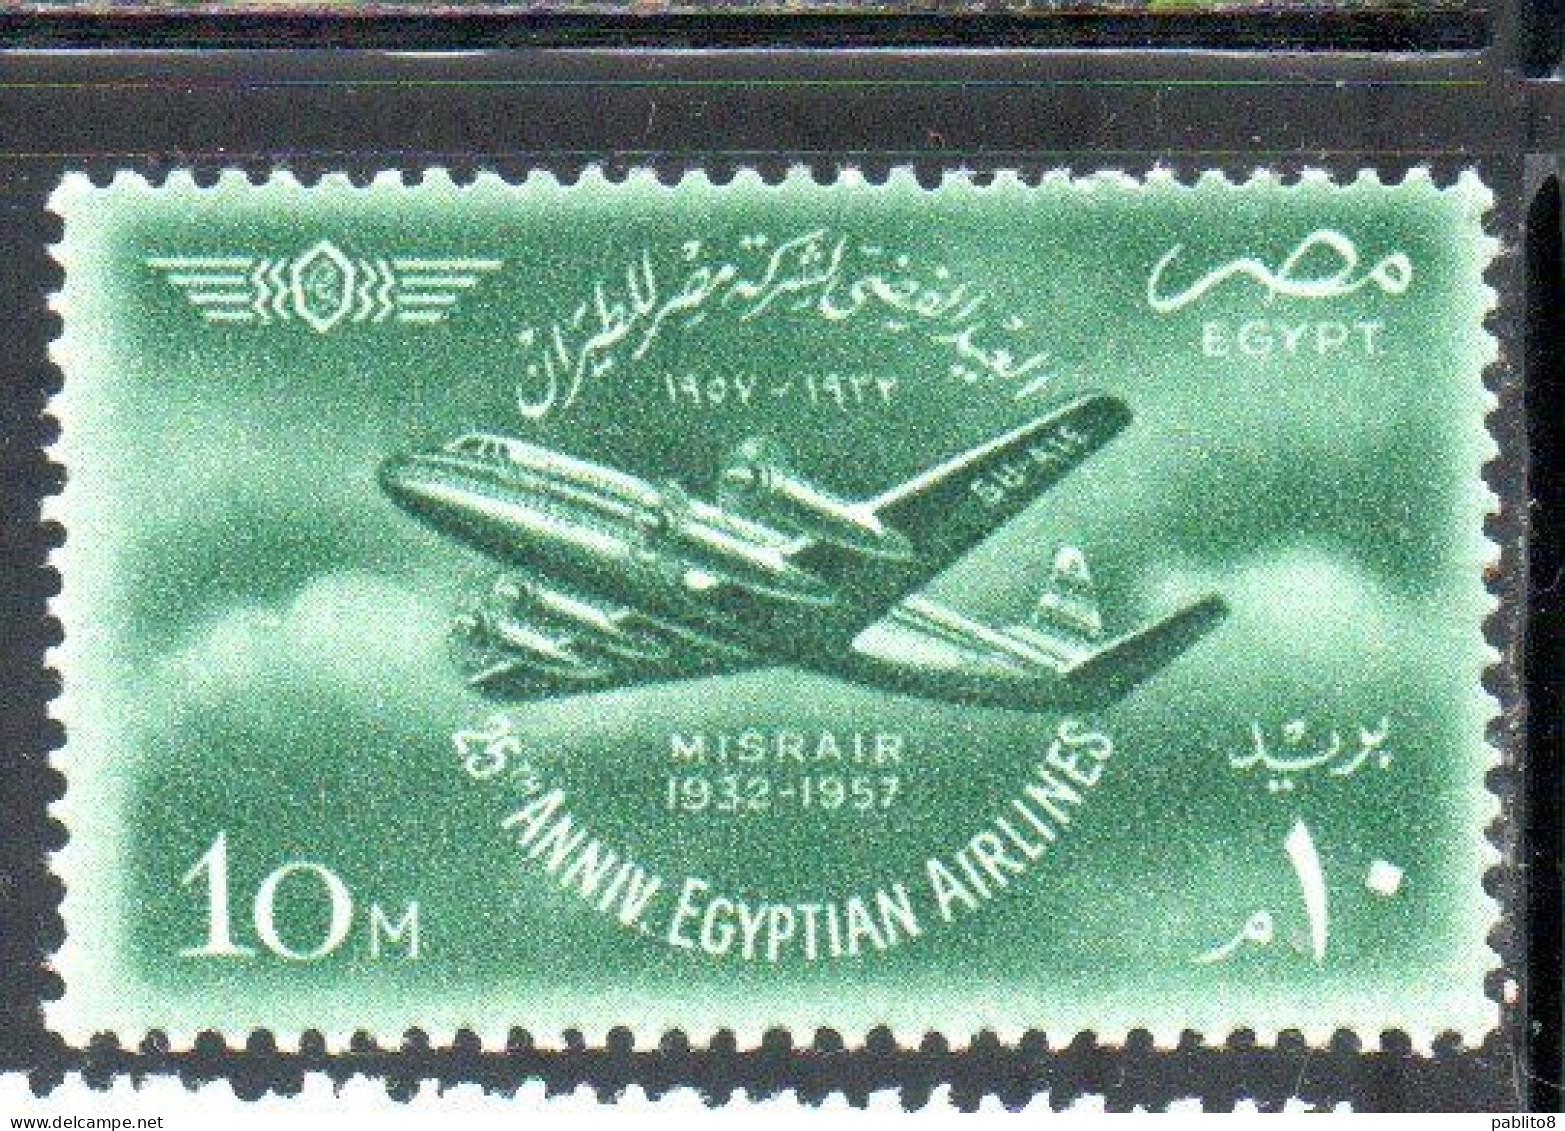 UAR EGYPT EGITTO 1957 EGYPTIAN AIR FORCE AND OF MISRAIR AIRLINE VISCOUNT PLANE 10m MNH - Unused Stamps